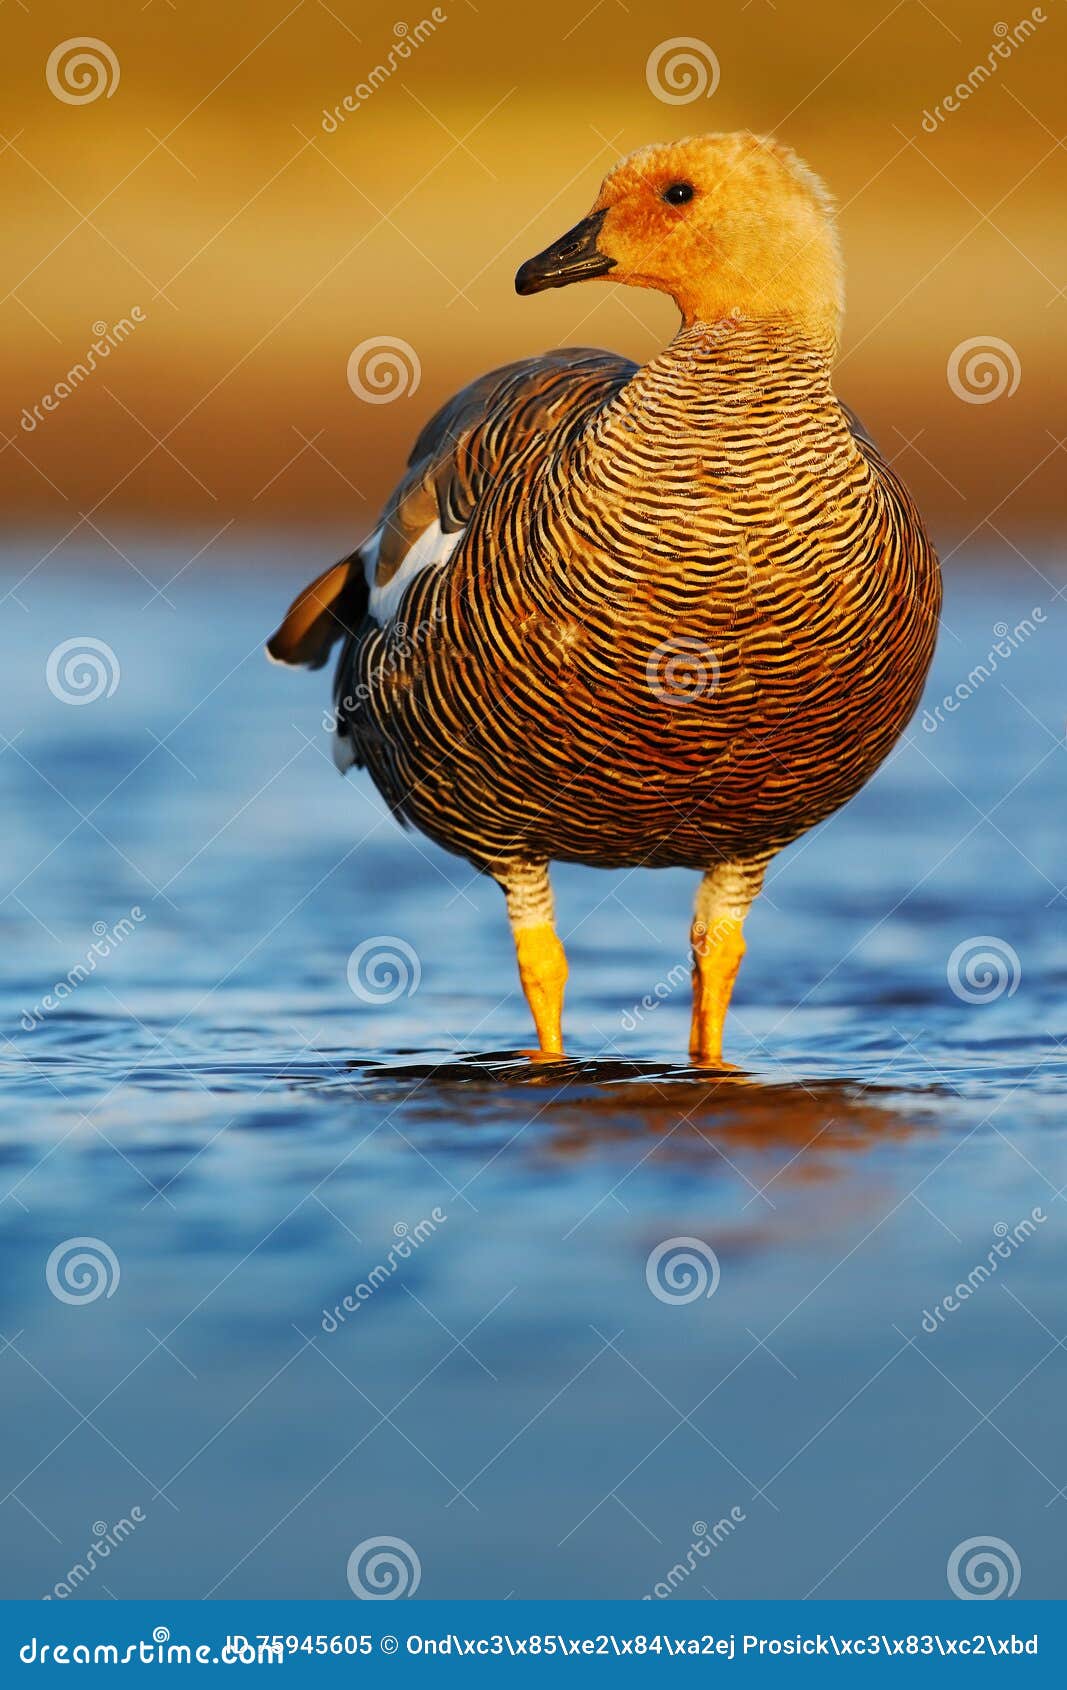 goose in the water, chloephaga hybrida, kelp goose, is a member of the duck, goose. it can be found in the southern part of south